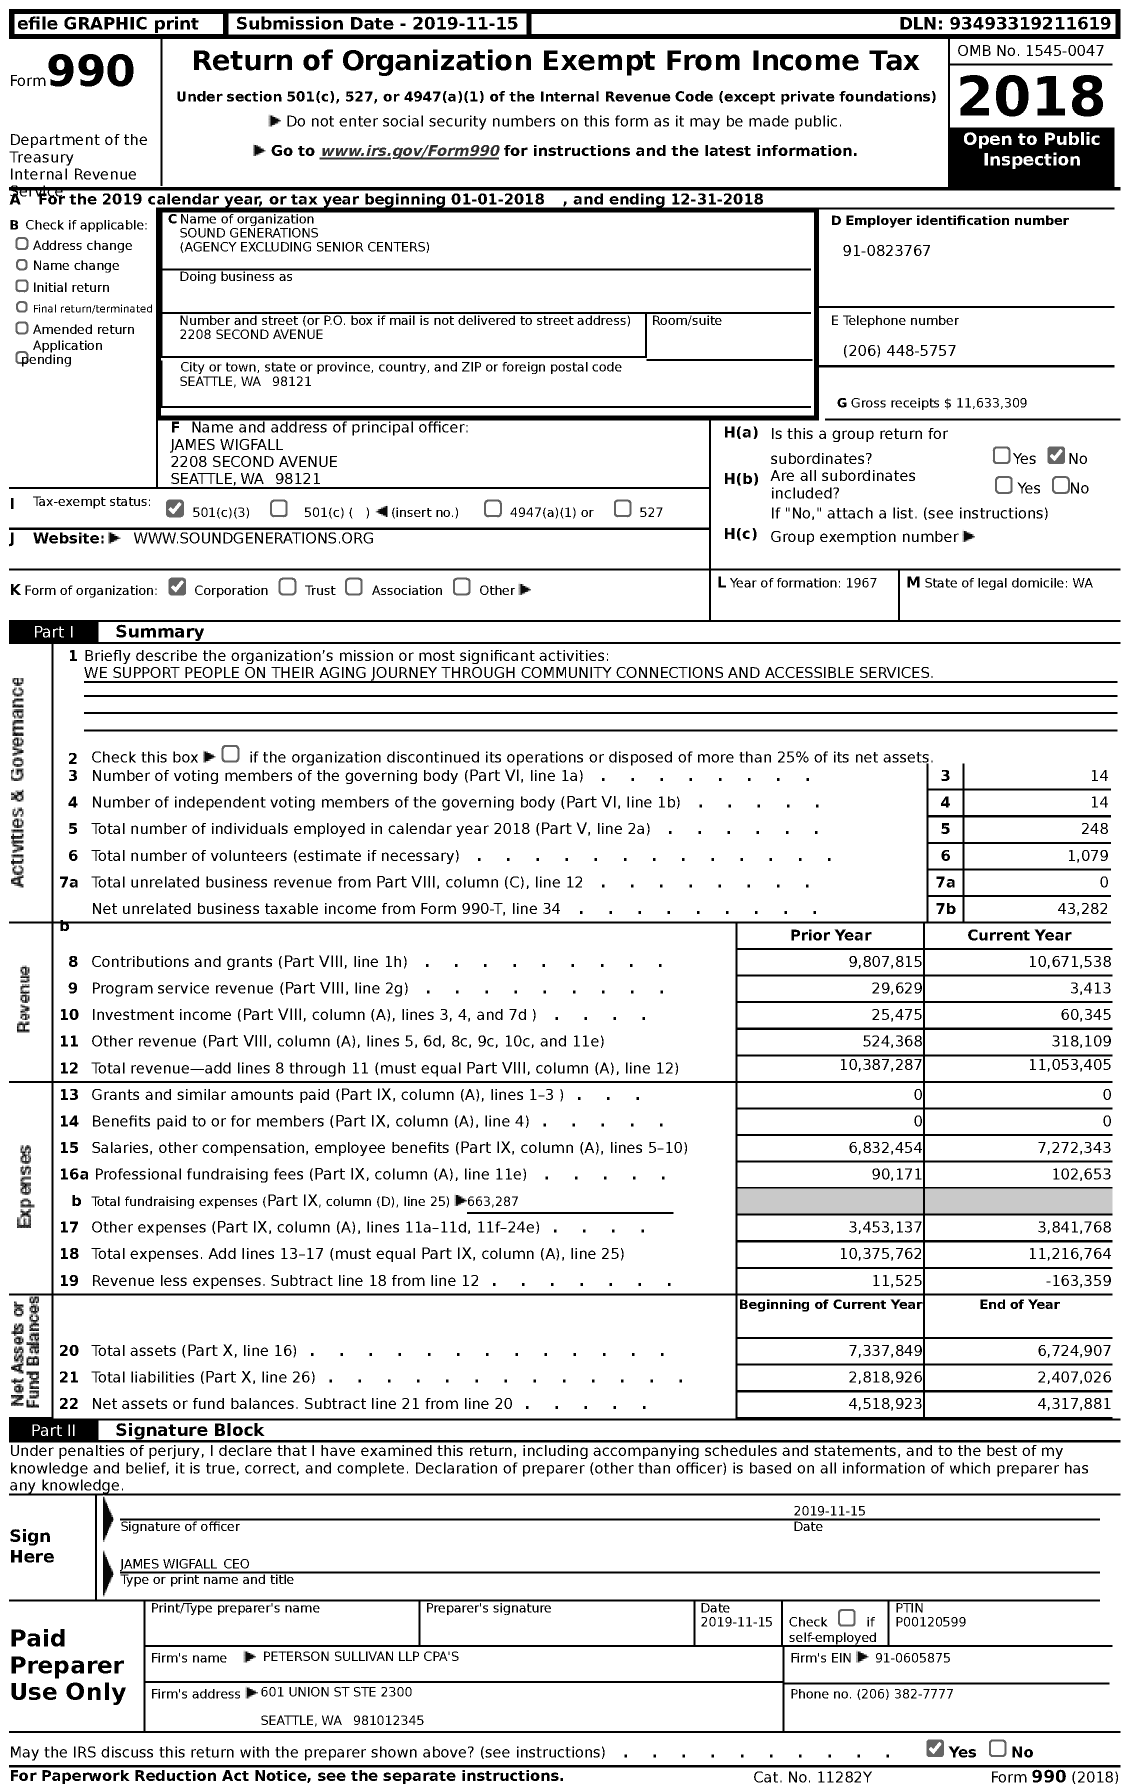 Image of first page of 2018 Form 990 for Sound Generations / Agency Excluding Senior Centers